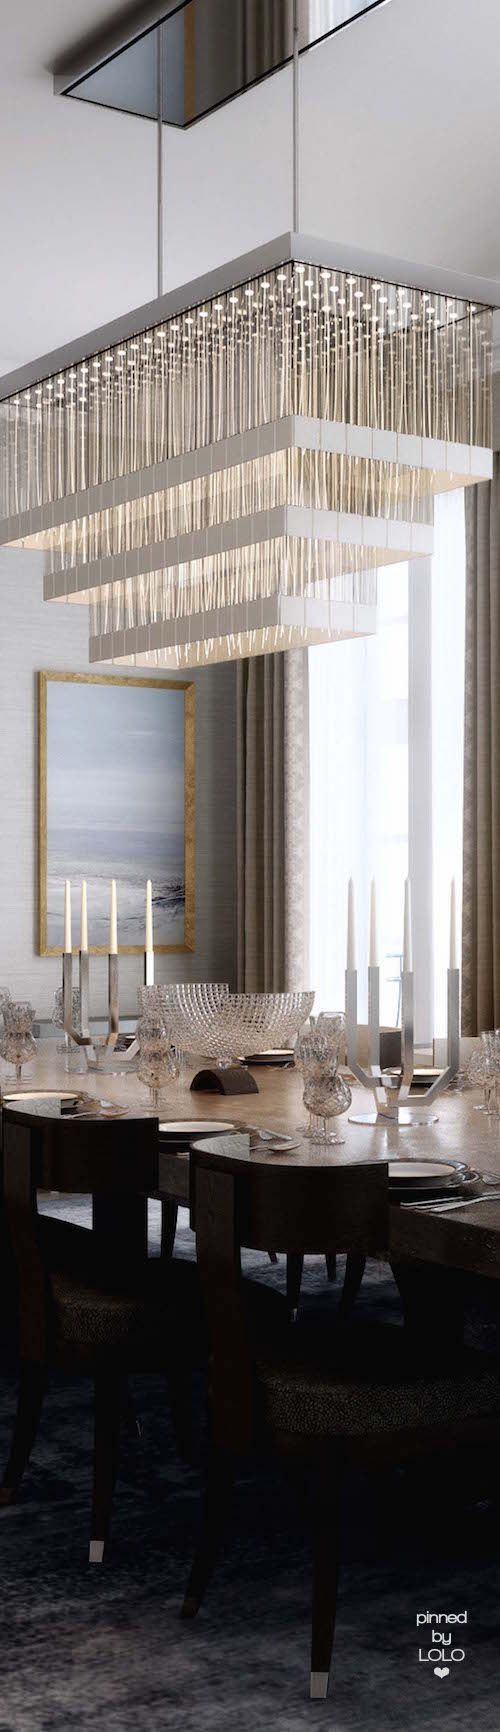 Best 25 Asian Chandeliers Ideas On Pinterest Dining Room With Asian Chandeliers (View 25 of 25)